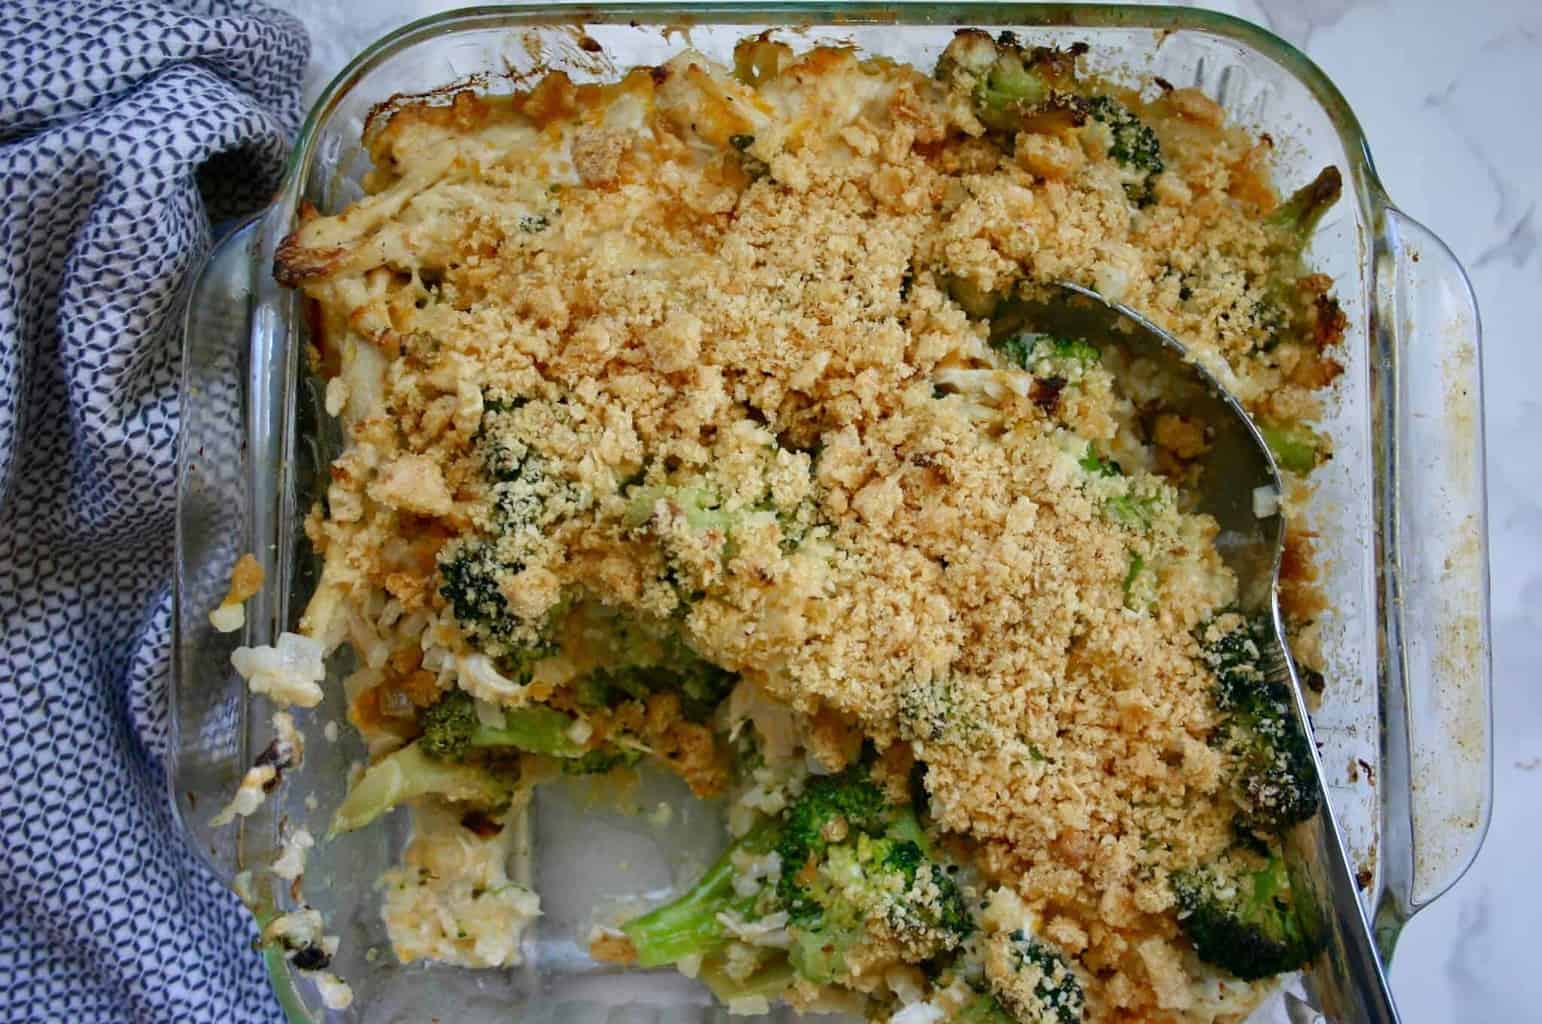 Need low carb dinner ideas? Add this low carb chicken broccoli casserole to your list of healthy dinner recipes to try!